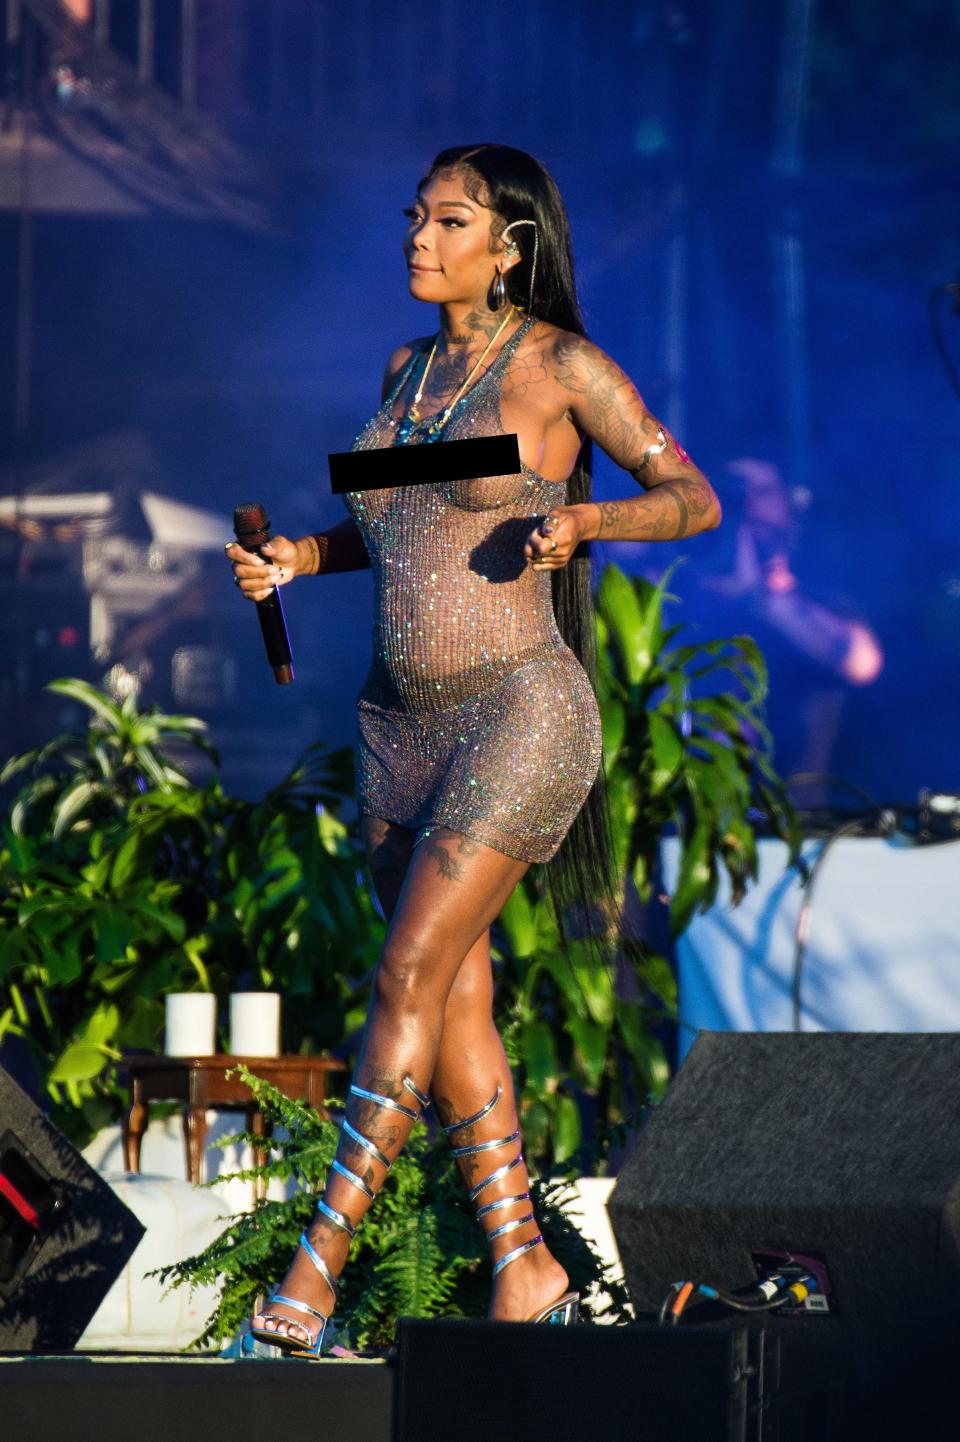 Summer Walker performs in a silver dress at Wireless Festival